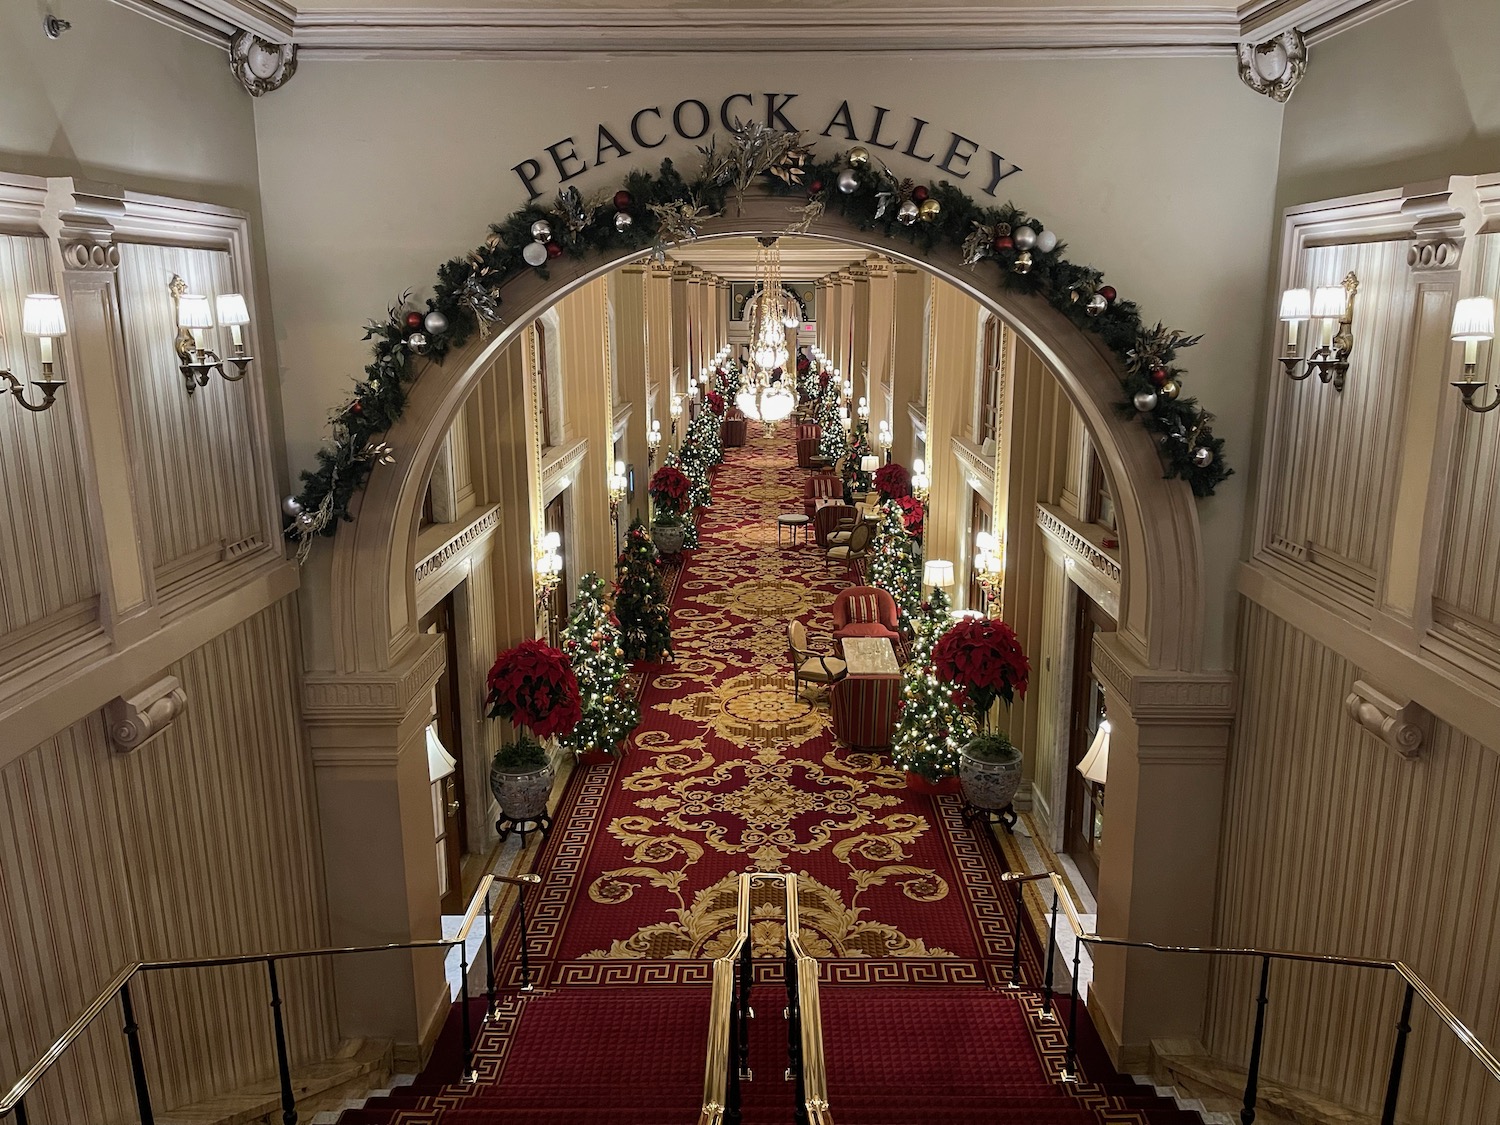 a hallway with red carpet and decorations